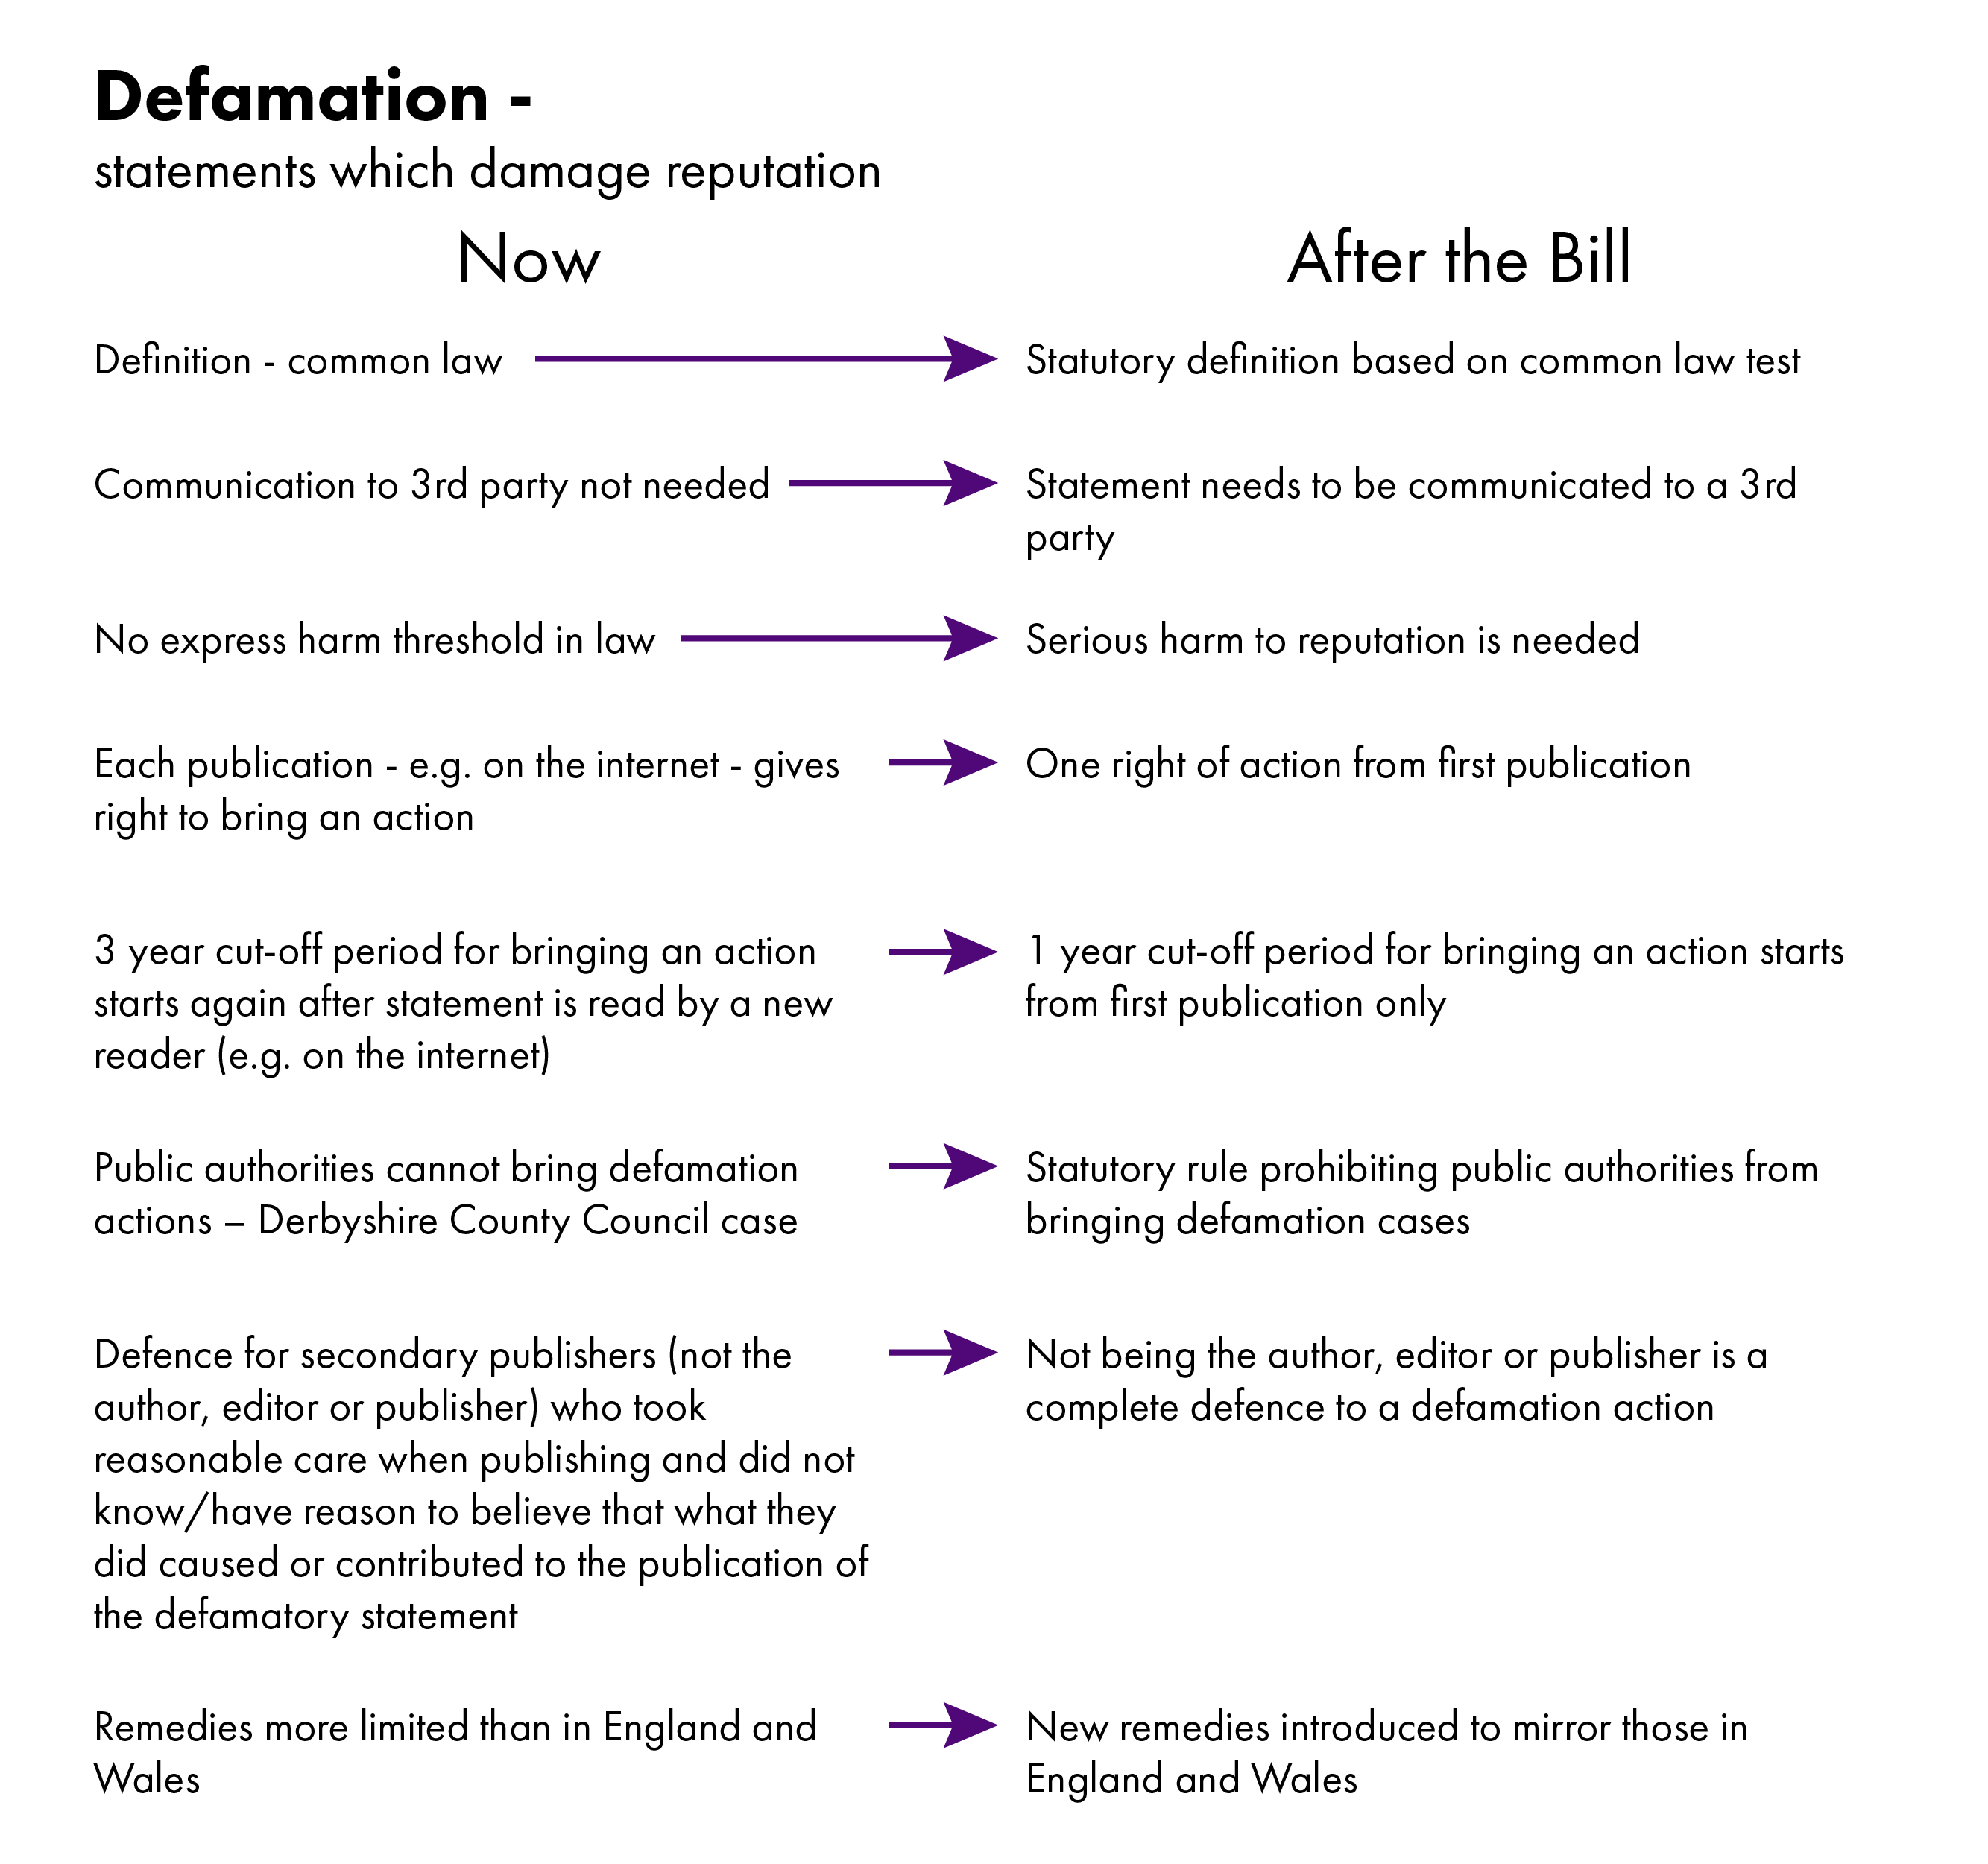 Infographic showing the current law and the main changes proposed by the Bill.